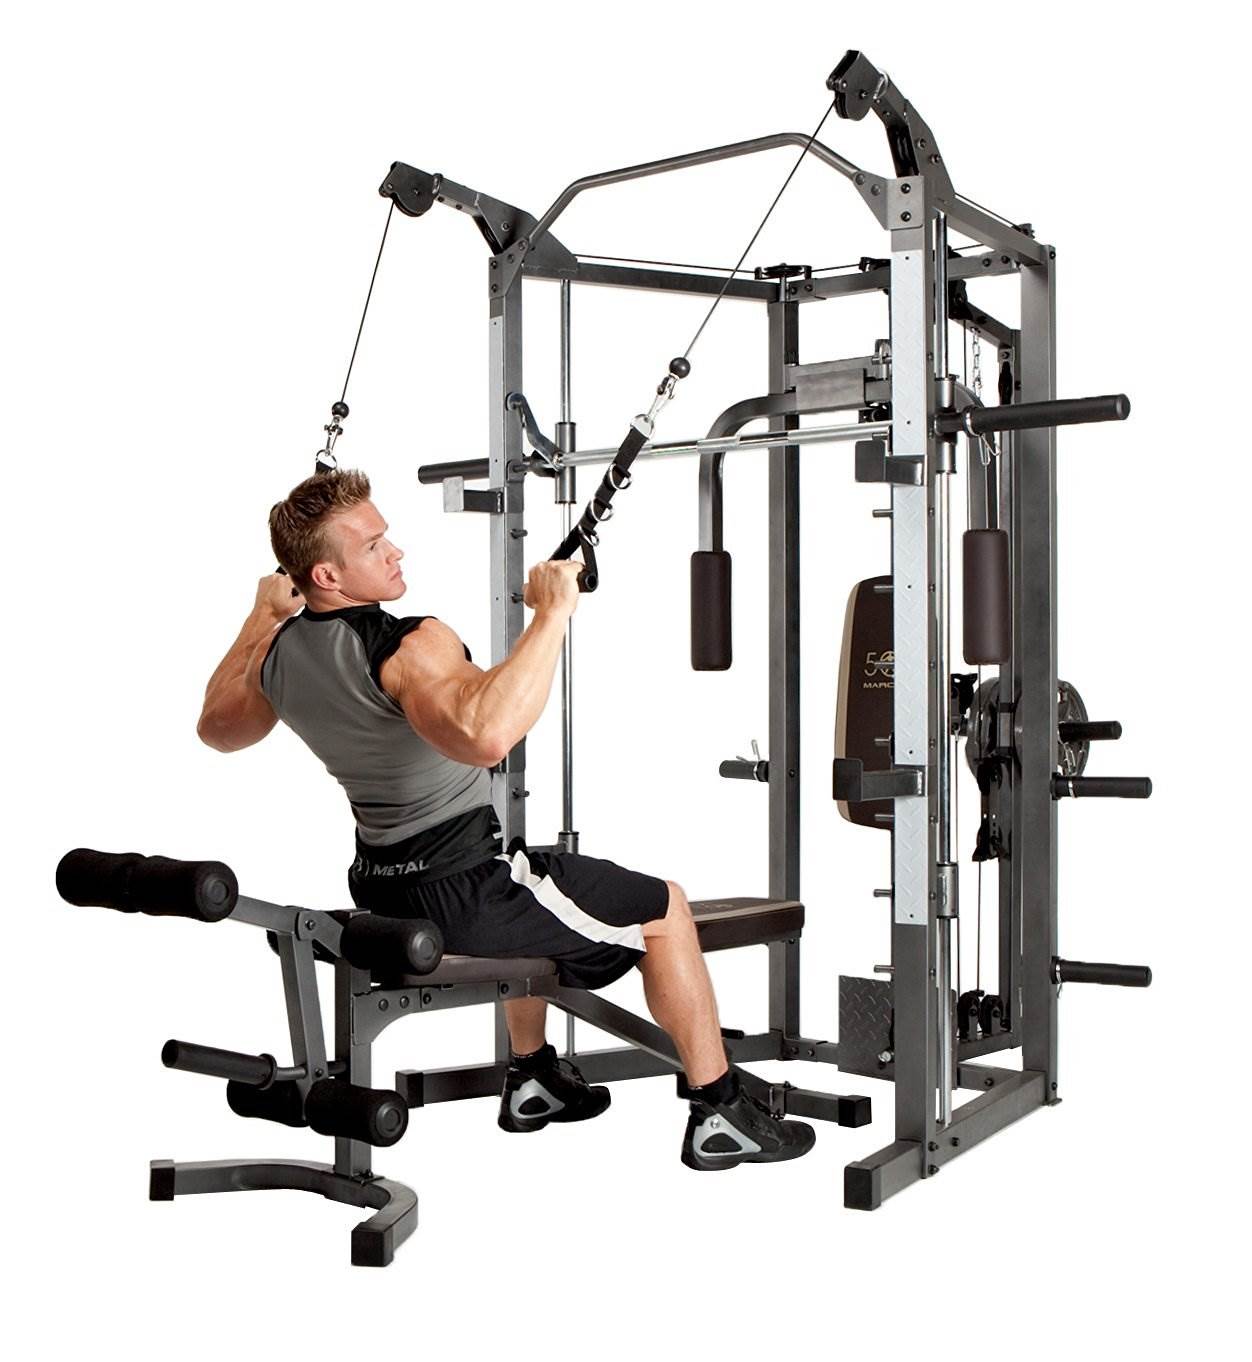 15 Minute Smith machine full body workout for Gym